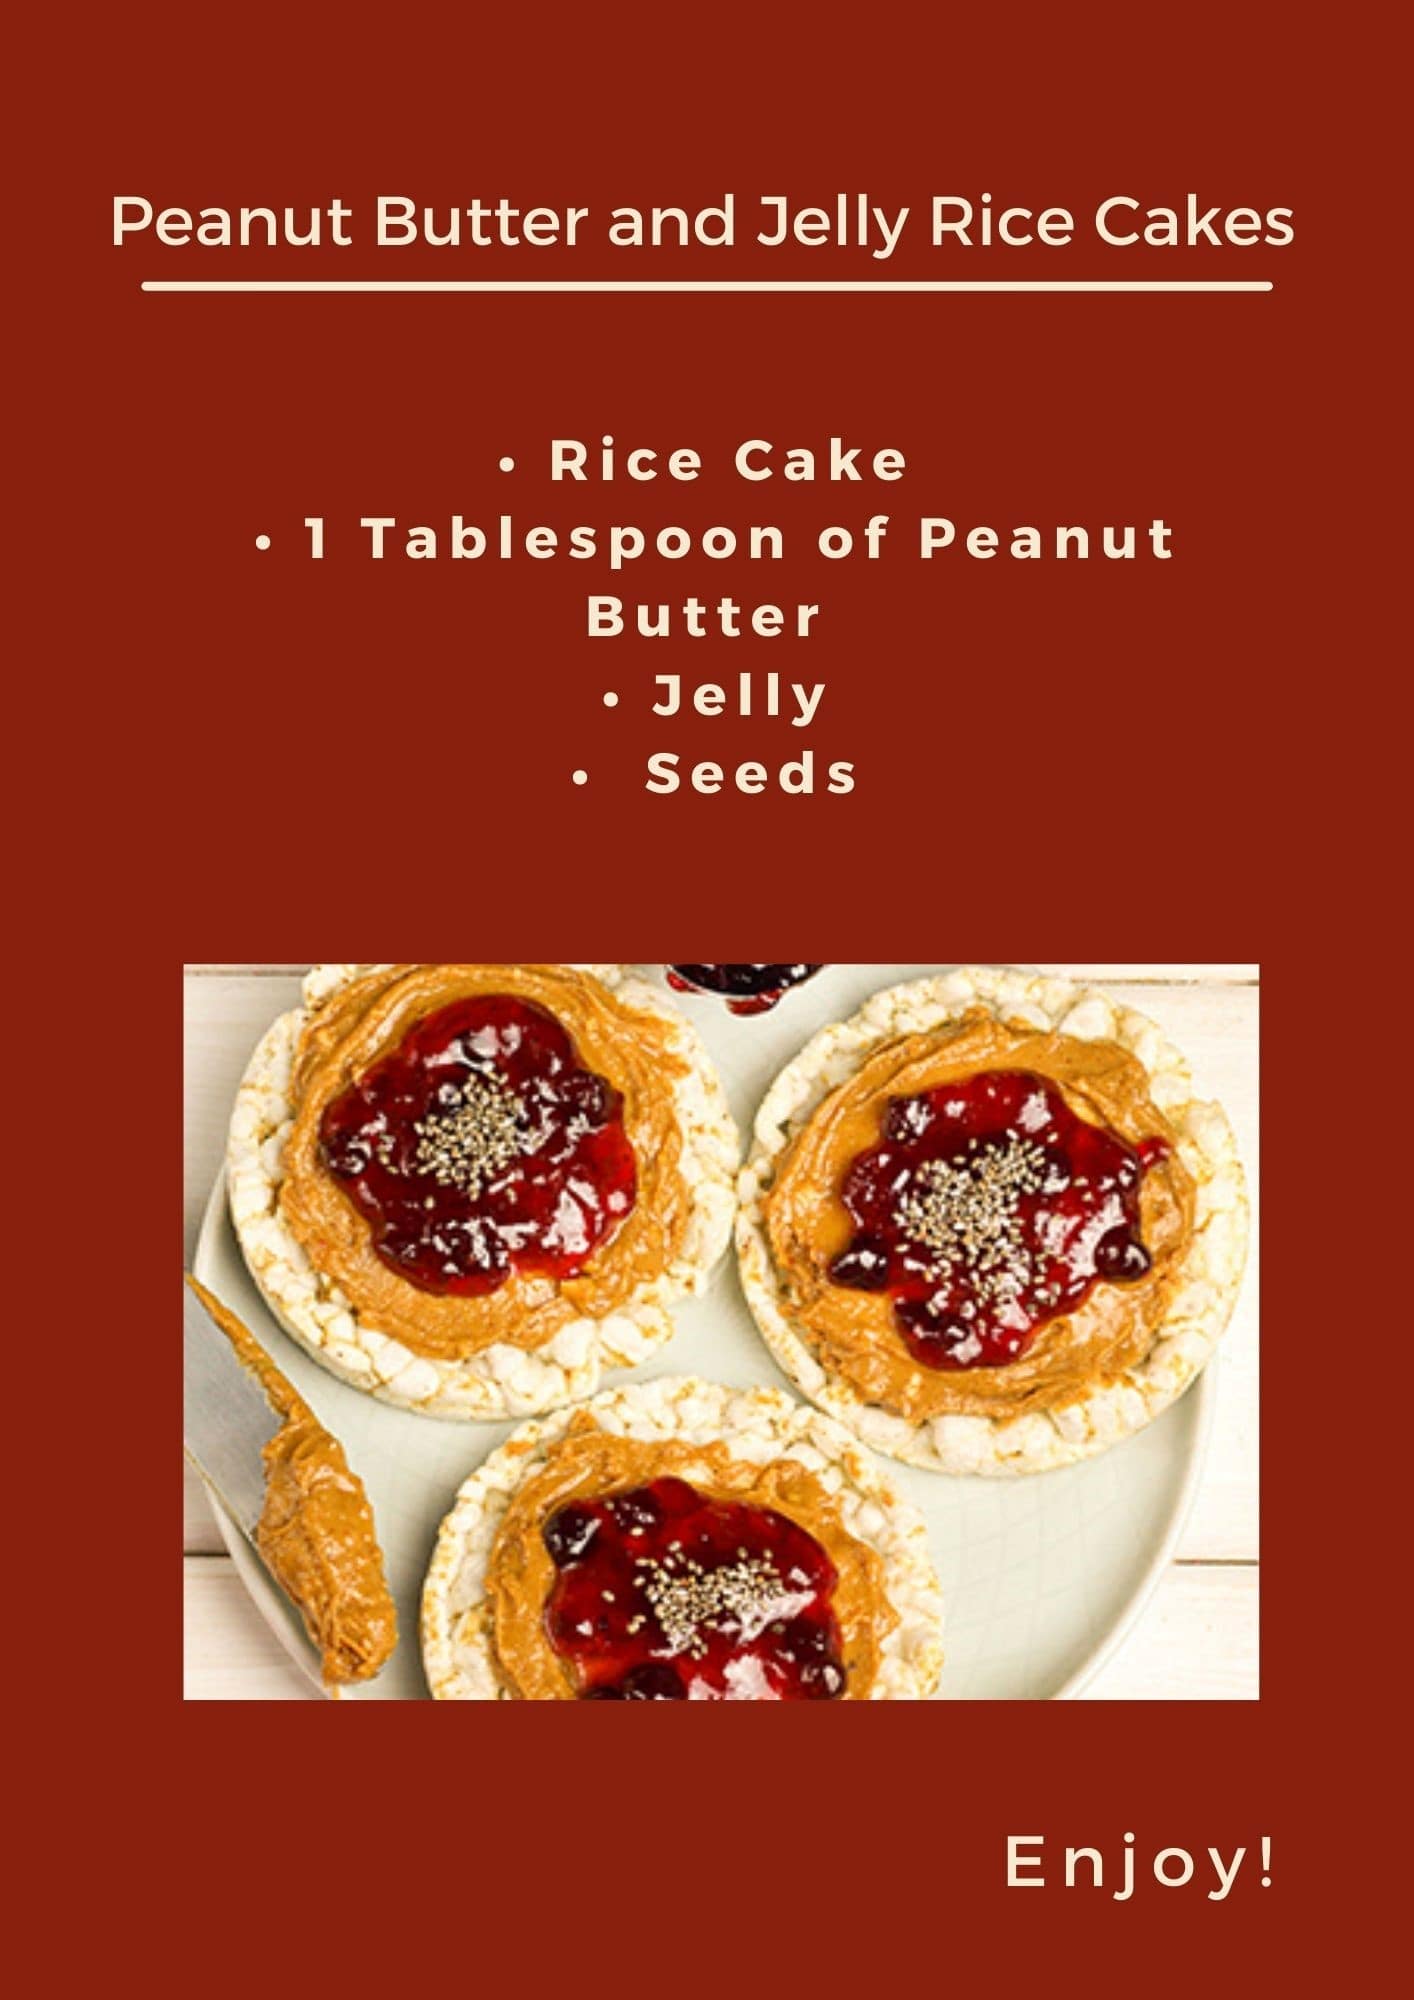 Peanut Butter and Jelly Rice Cakes Recipe